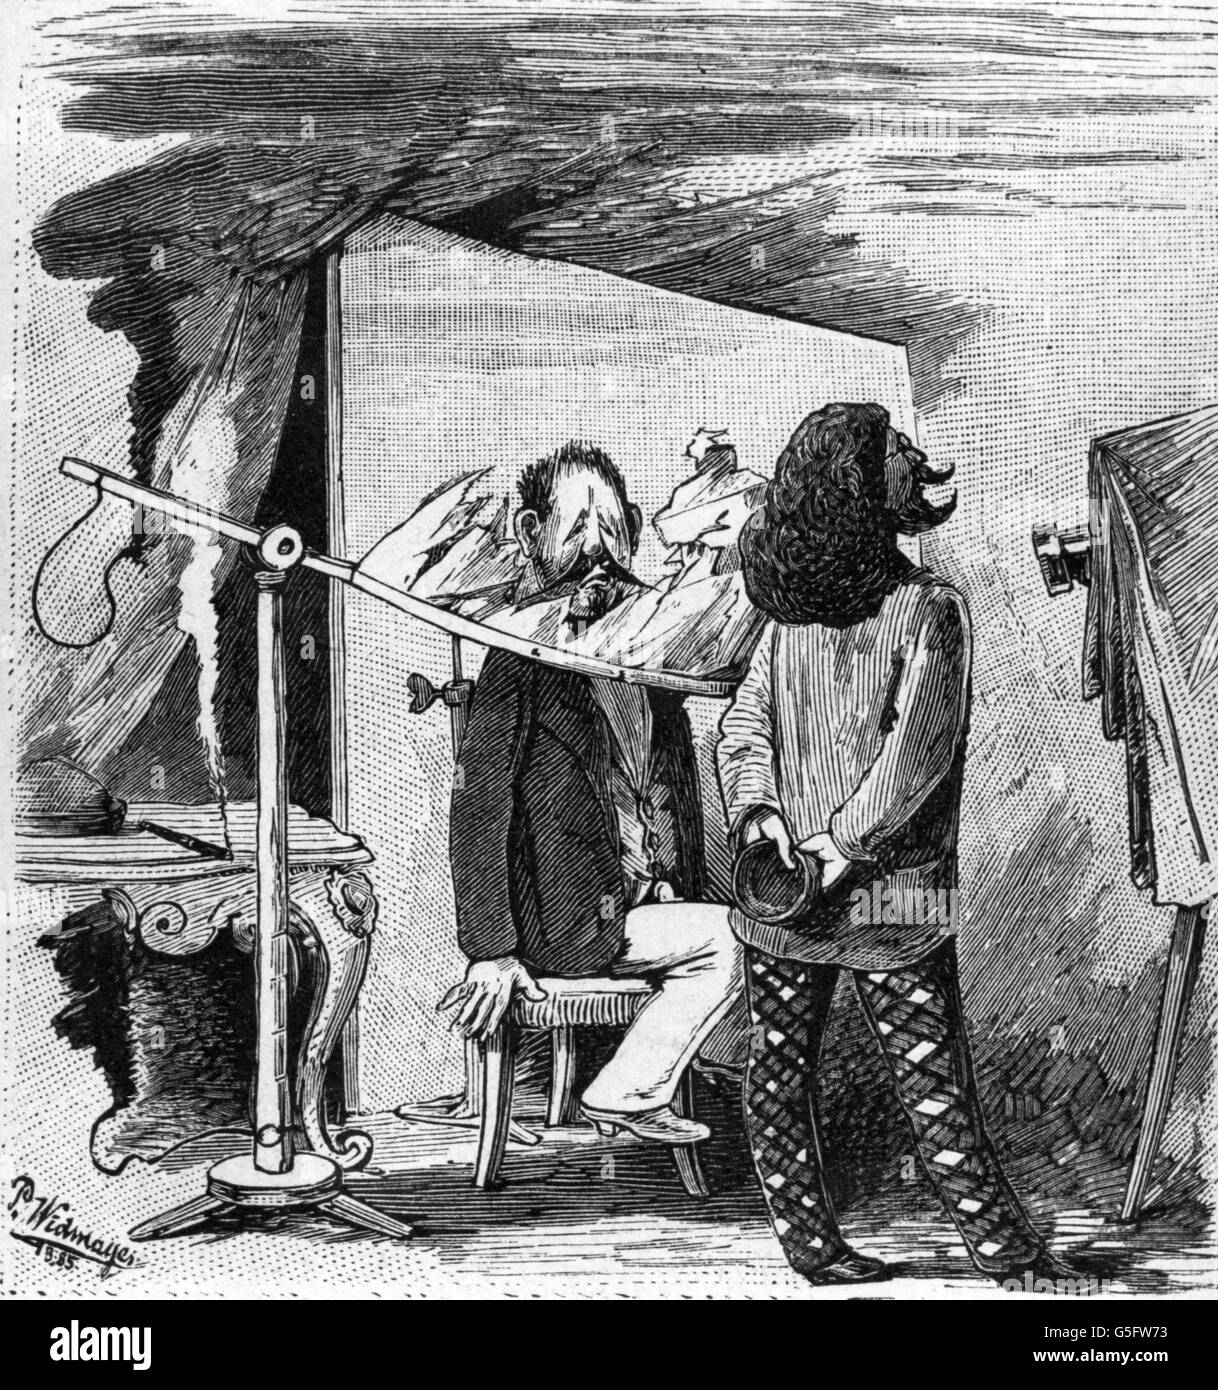 photography, caricature, "Der Lichtschirm oder die Zigarre im  photographischen Atelier" (The Light Screen or the Cigar in the Studio),  fourth picture, wood engraving by Paul Widmayer (* 1856), out of:  "Illustrirte Chronik